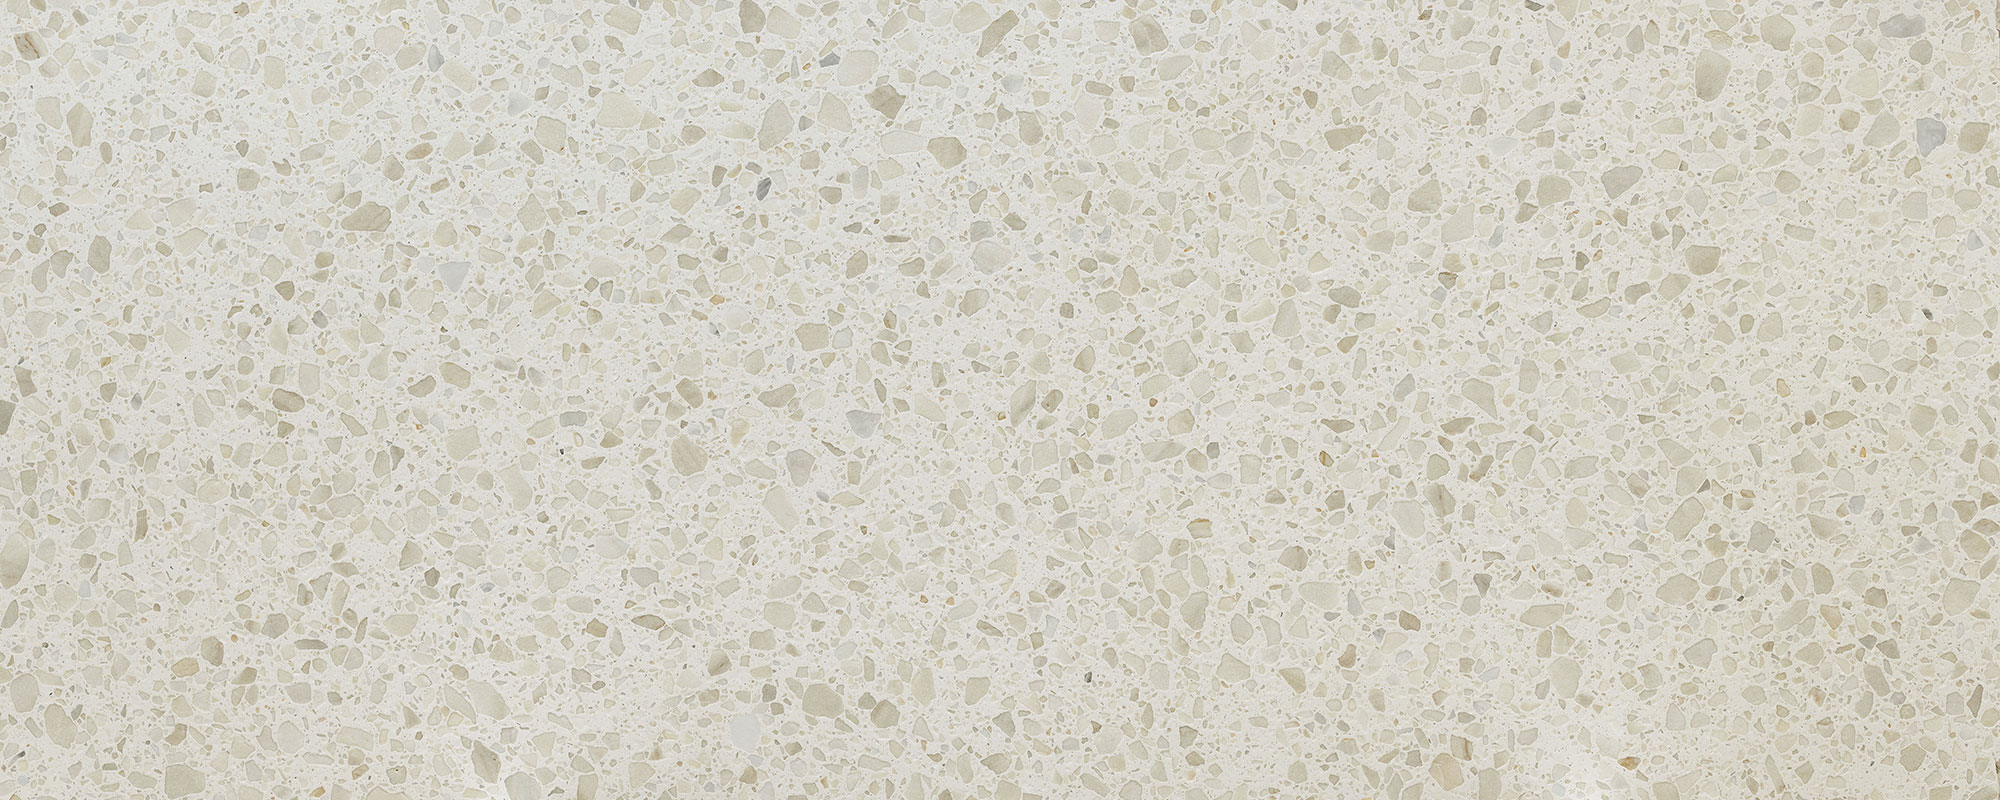 COMPAC, COMPACSURFACES, COMPAC THE SURFACE COMPANY, MARBLE COLLECTION, CLASSIC NEW WHITE